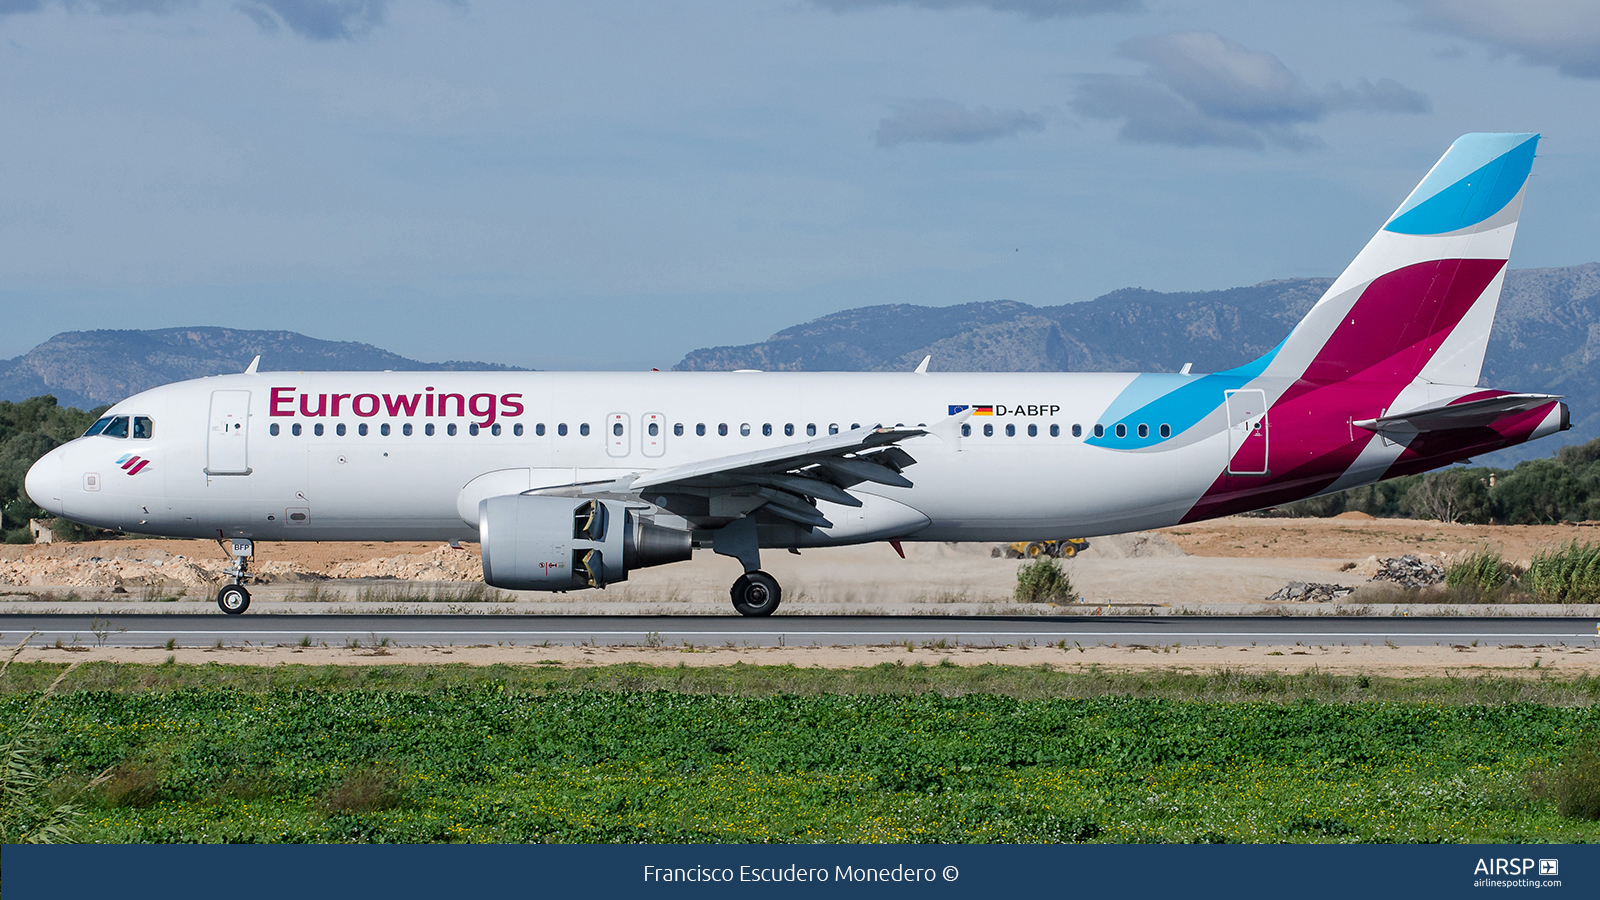 Eurowings  Airbus A320  D-ABFP